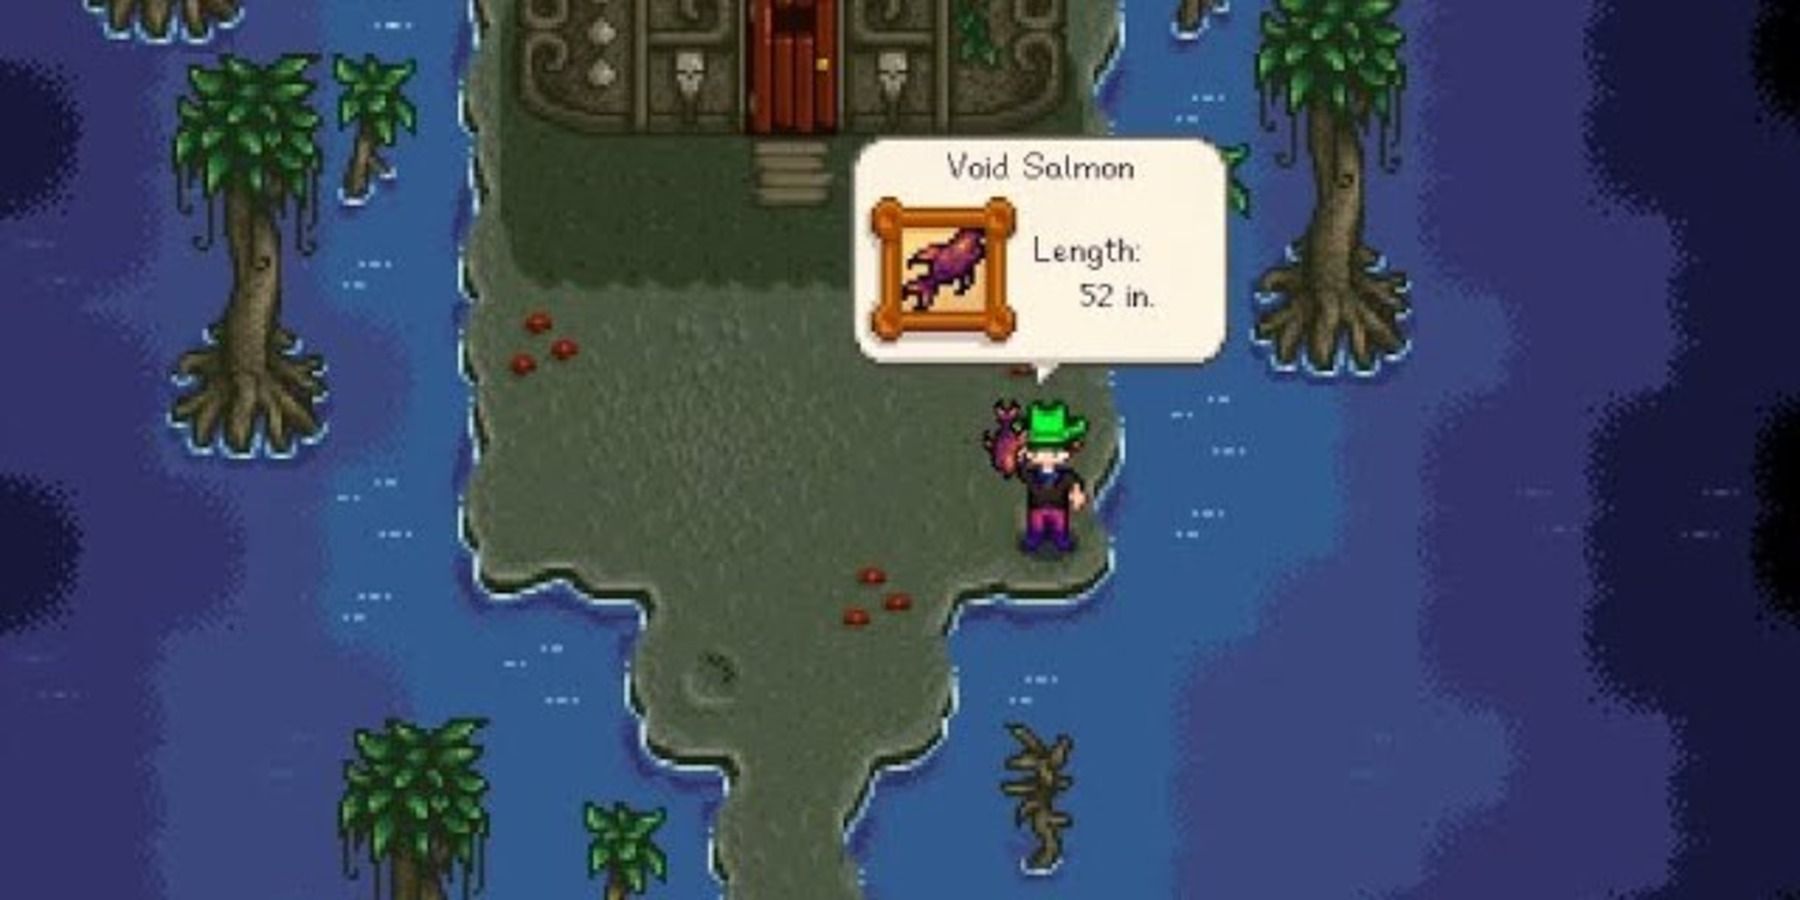 A player catching a Void Salmon in the Witch's Swamp, close to the Witch's Hut, in Stardew Valley.